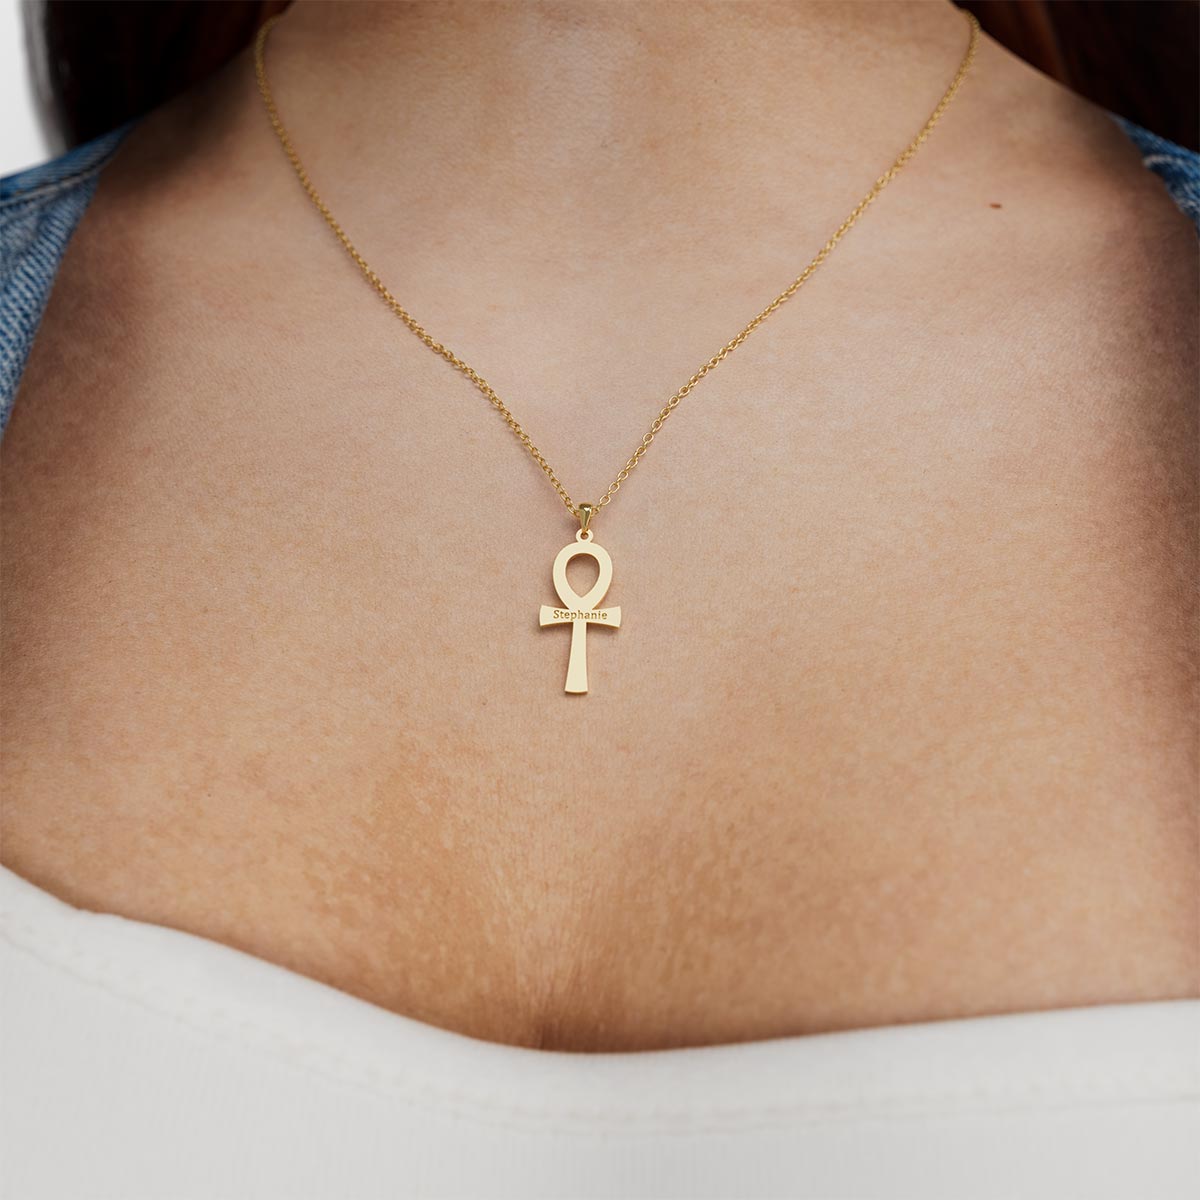 Ankh Egyptian Cross Necklace With Personalized Engraving